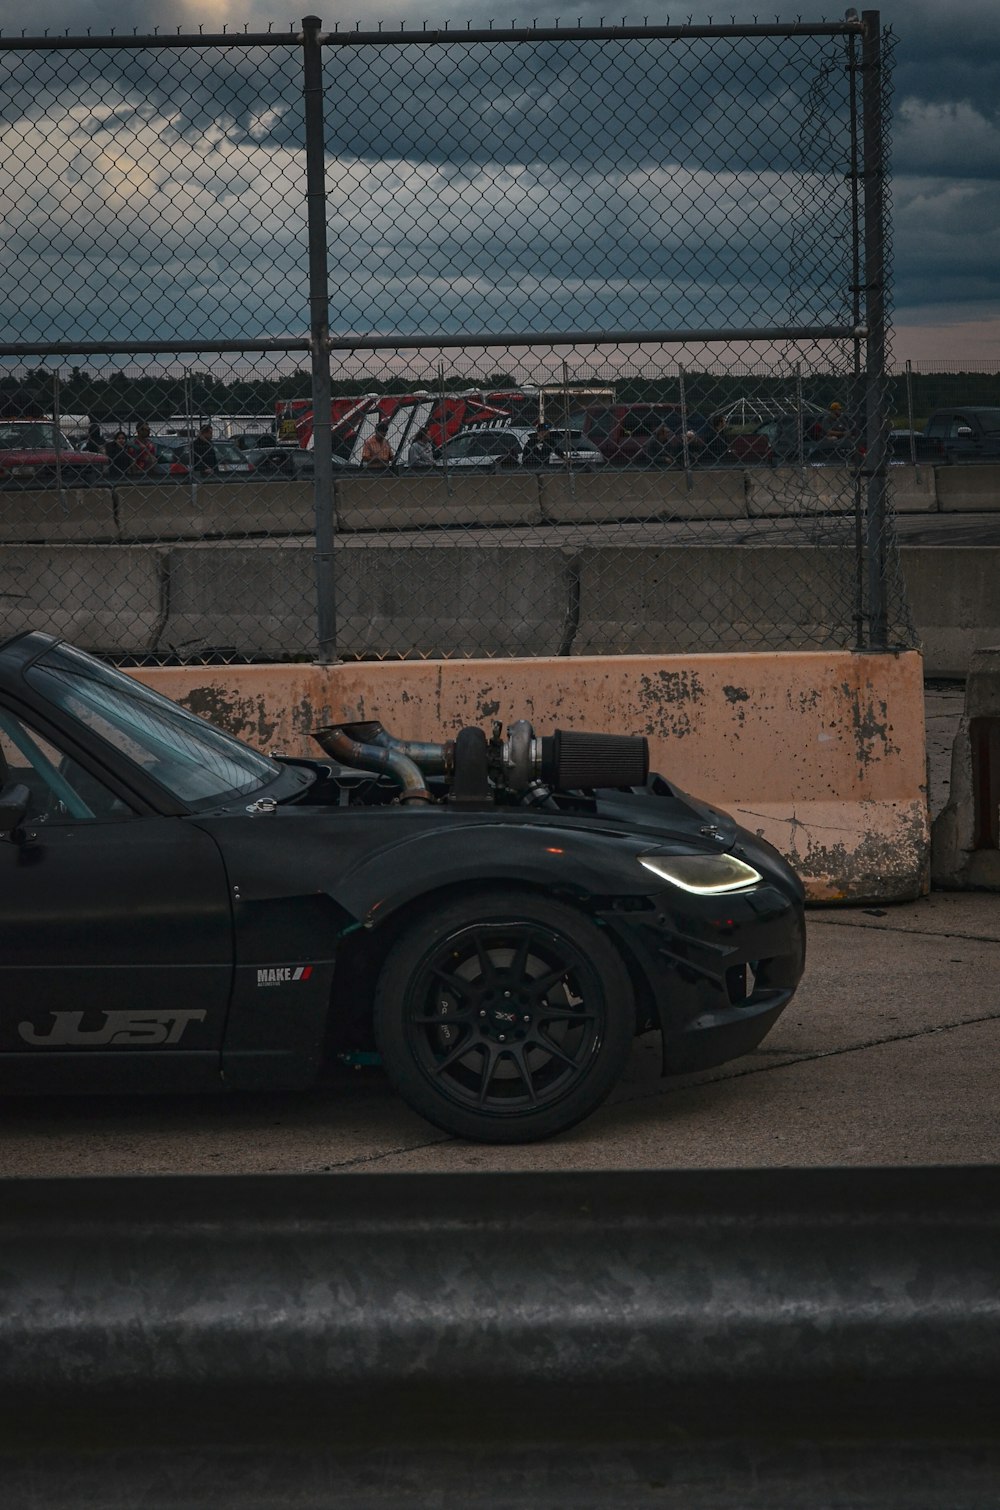 a black sports car parked in front of a fence